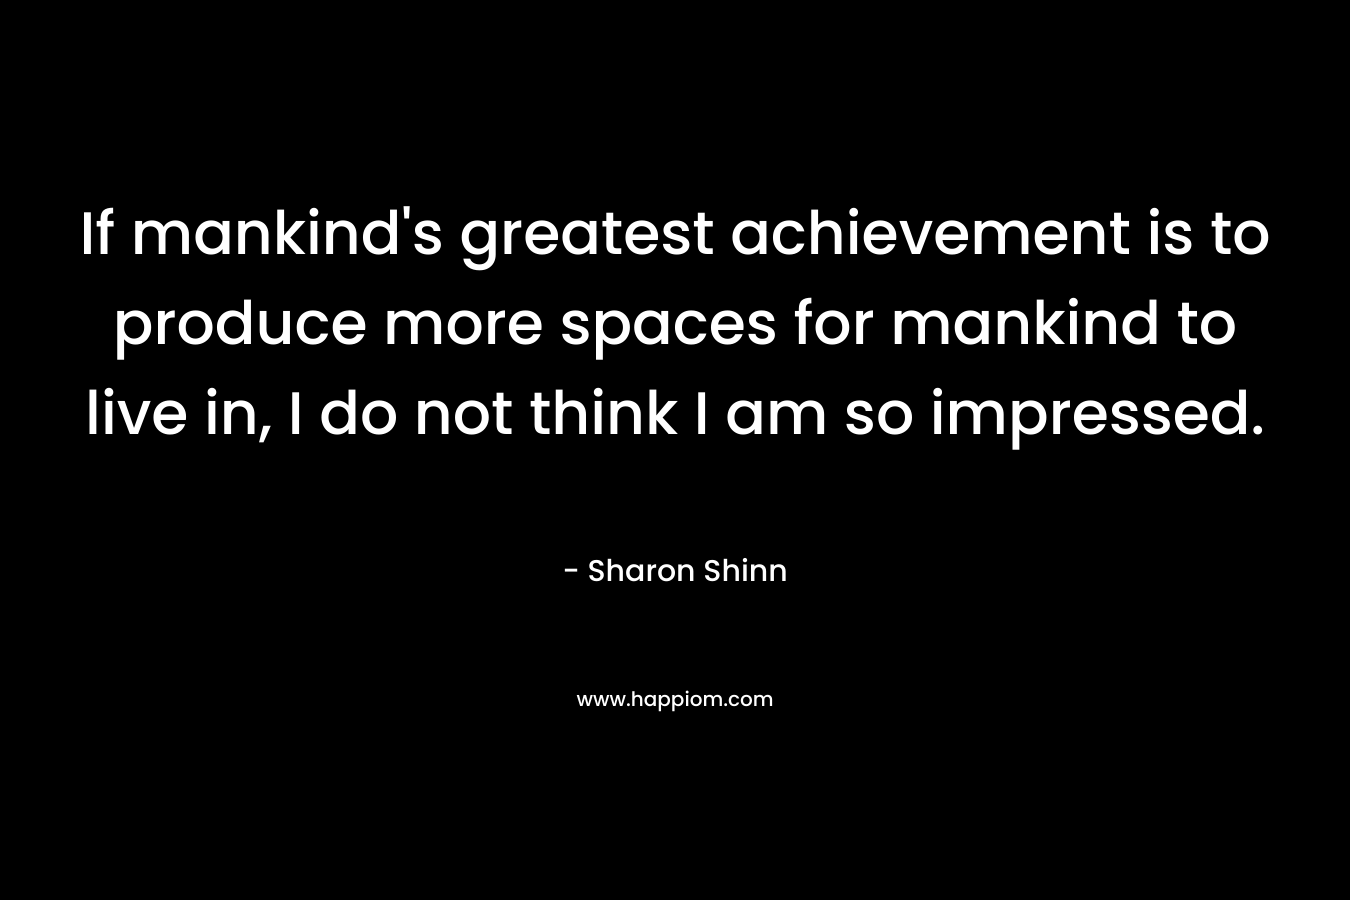 If mankind’s greatest achievement is to produce more spaces for mankind to live in, I do not think I am so impressed. – Sharon Shinn